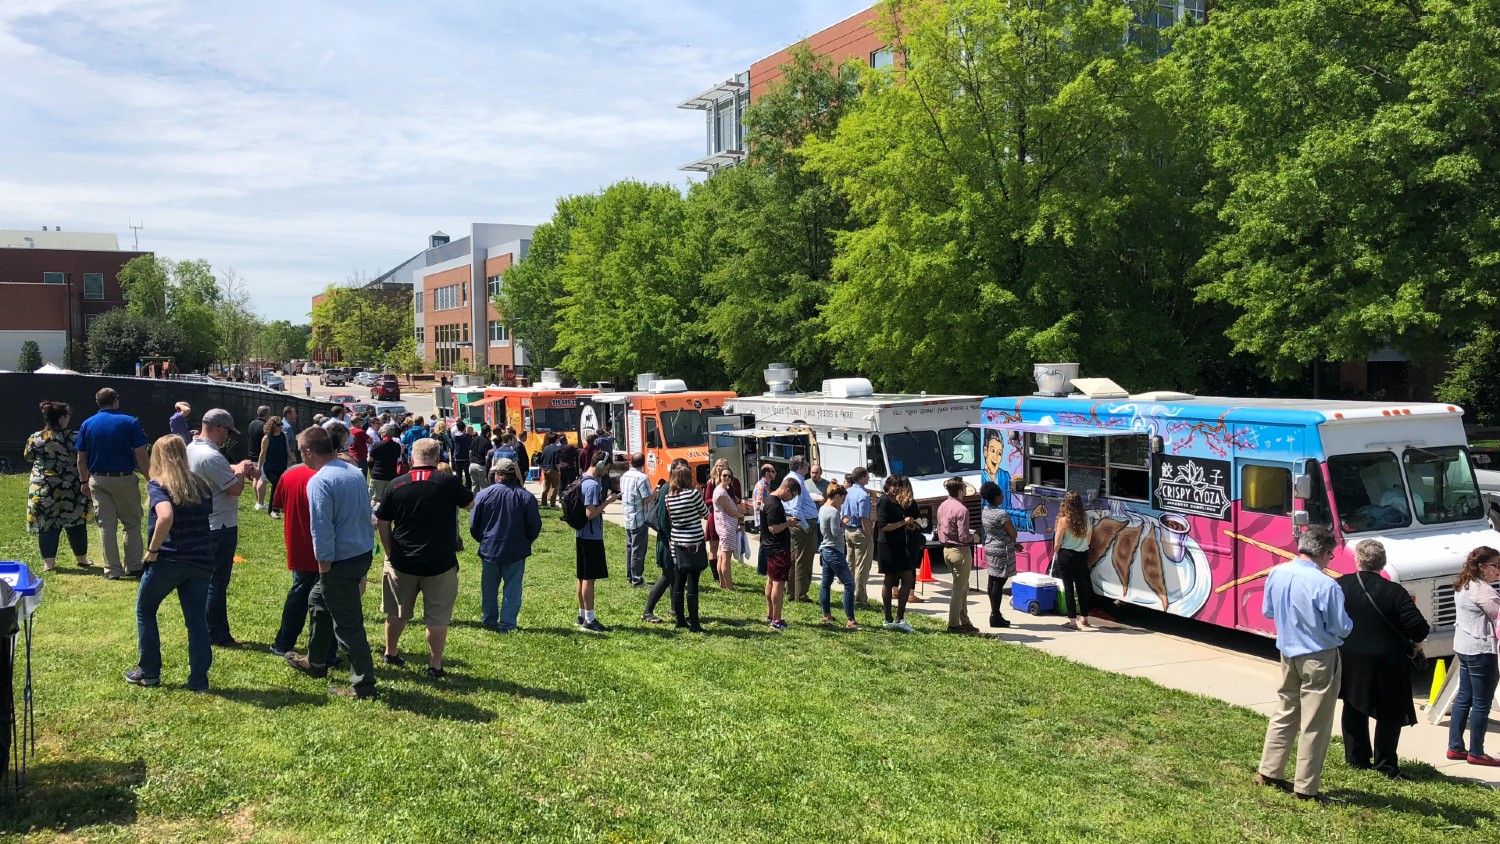 A line of people waiting for a food truck